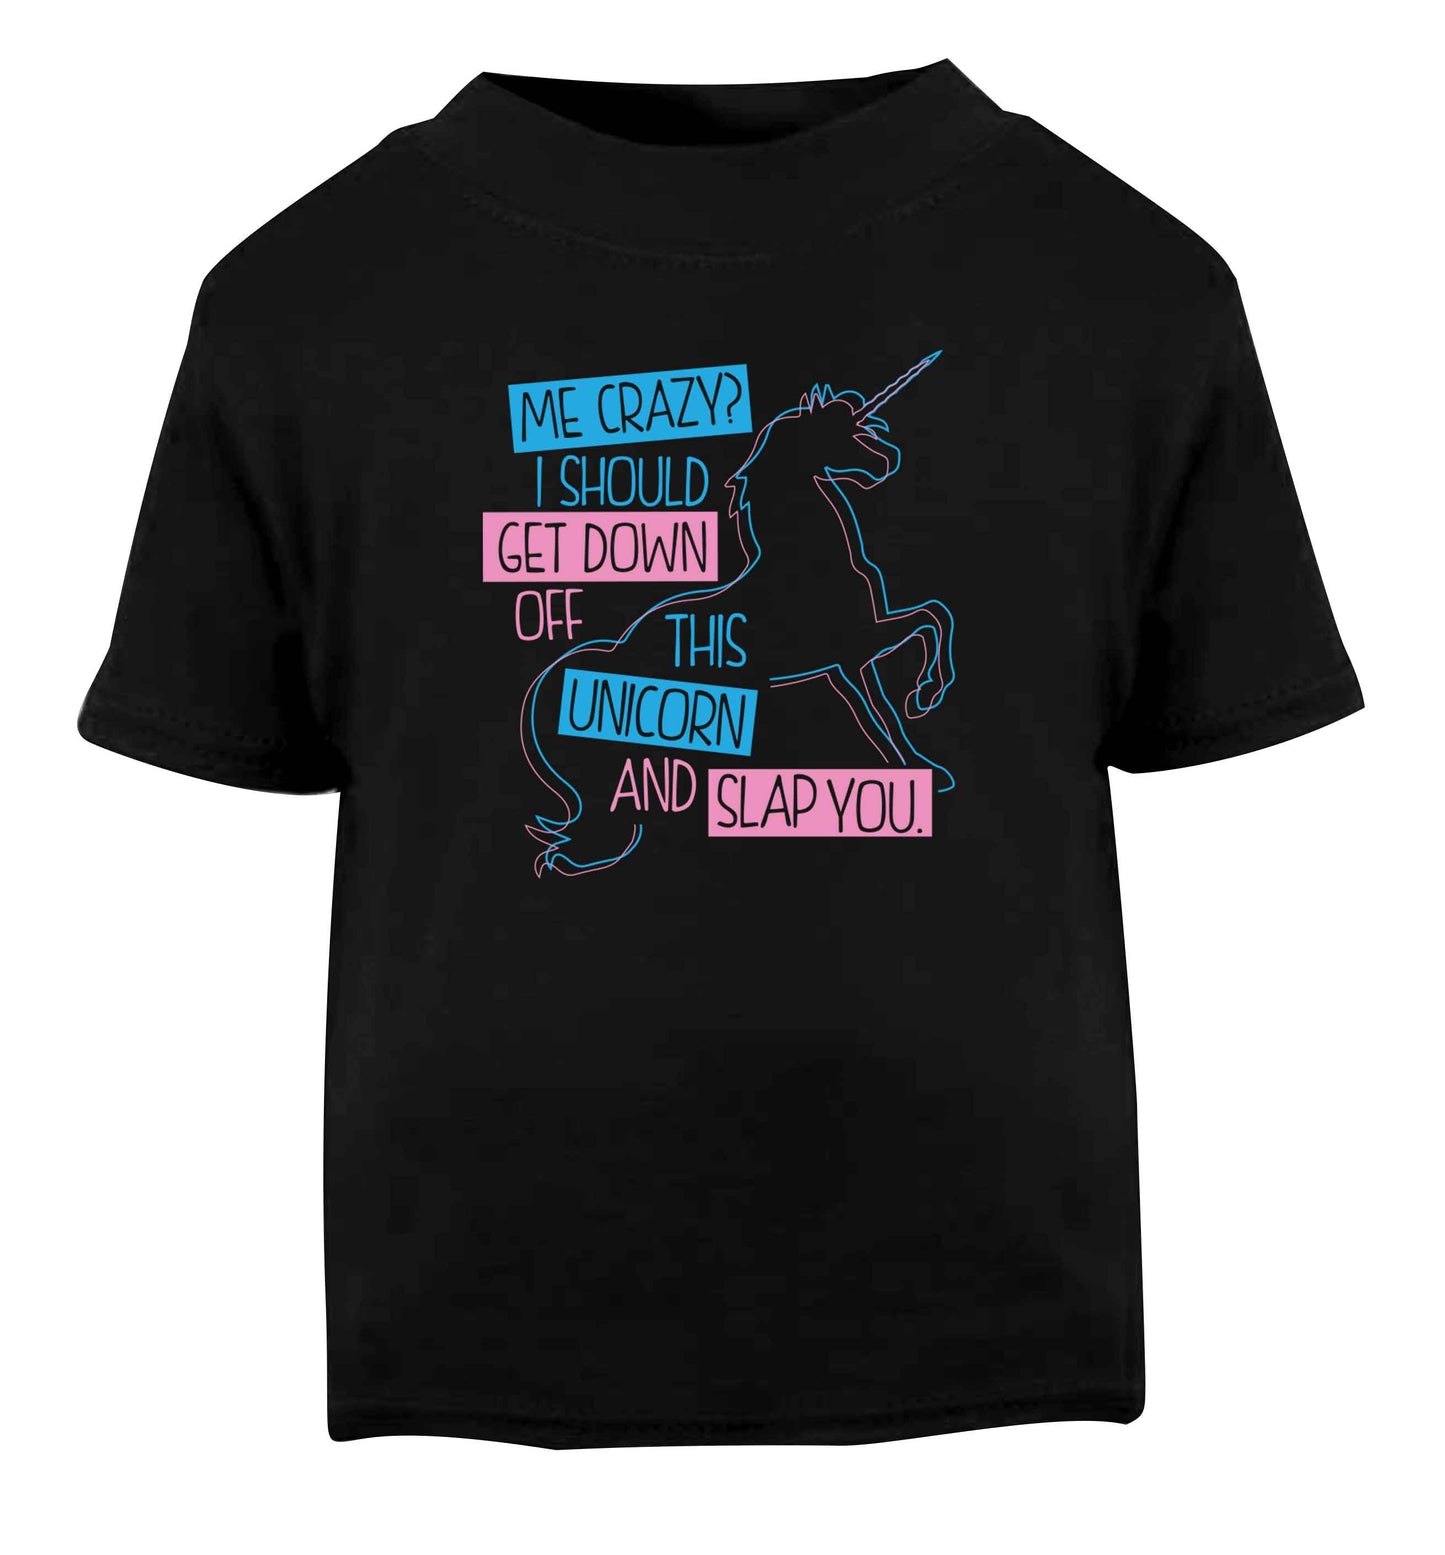 Me crazy? I should get down off this unicorn and slap you Black Baby Toddler Tshirt 2 years